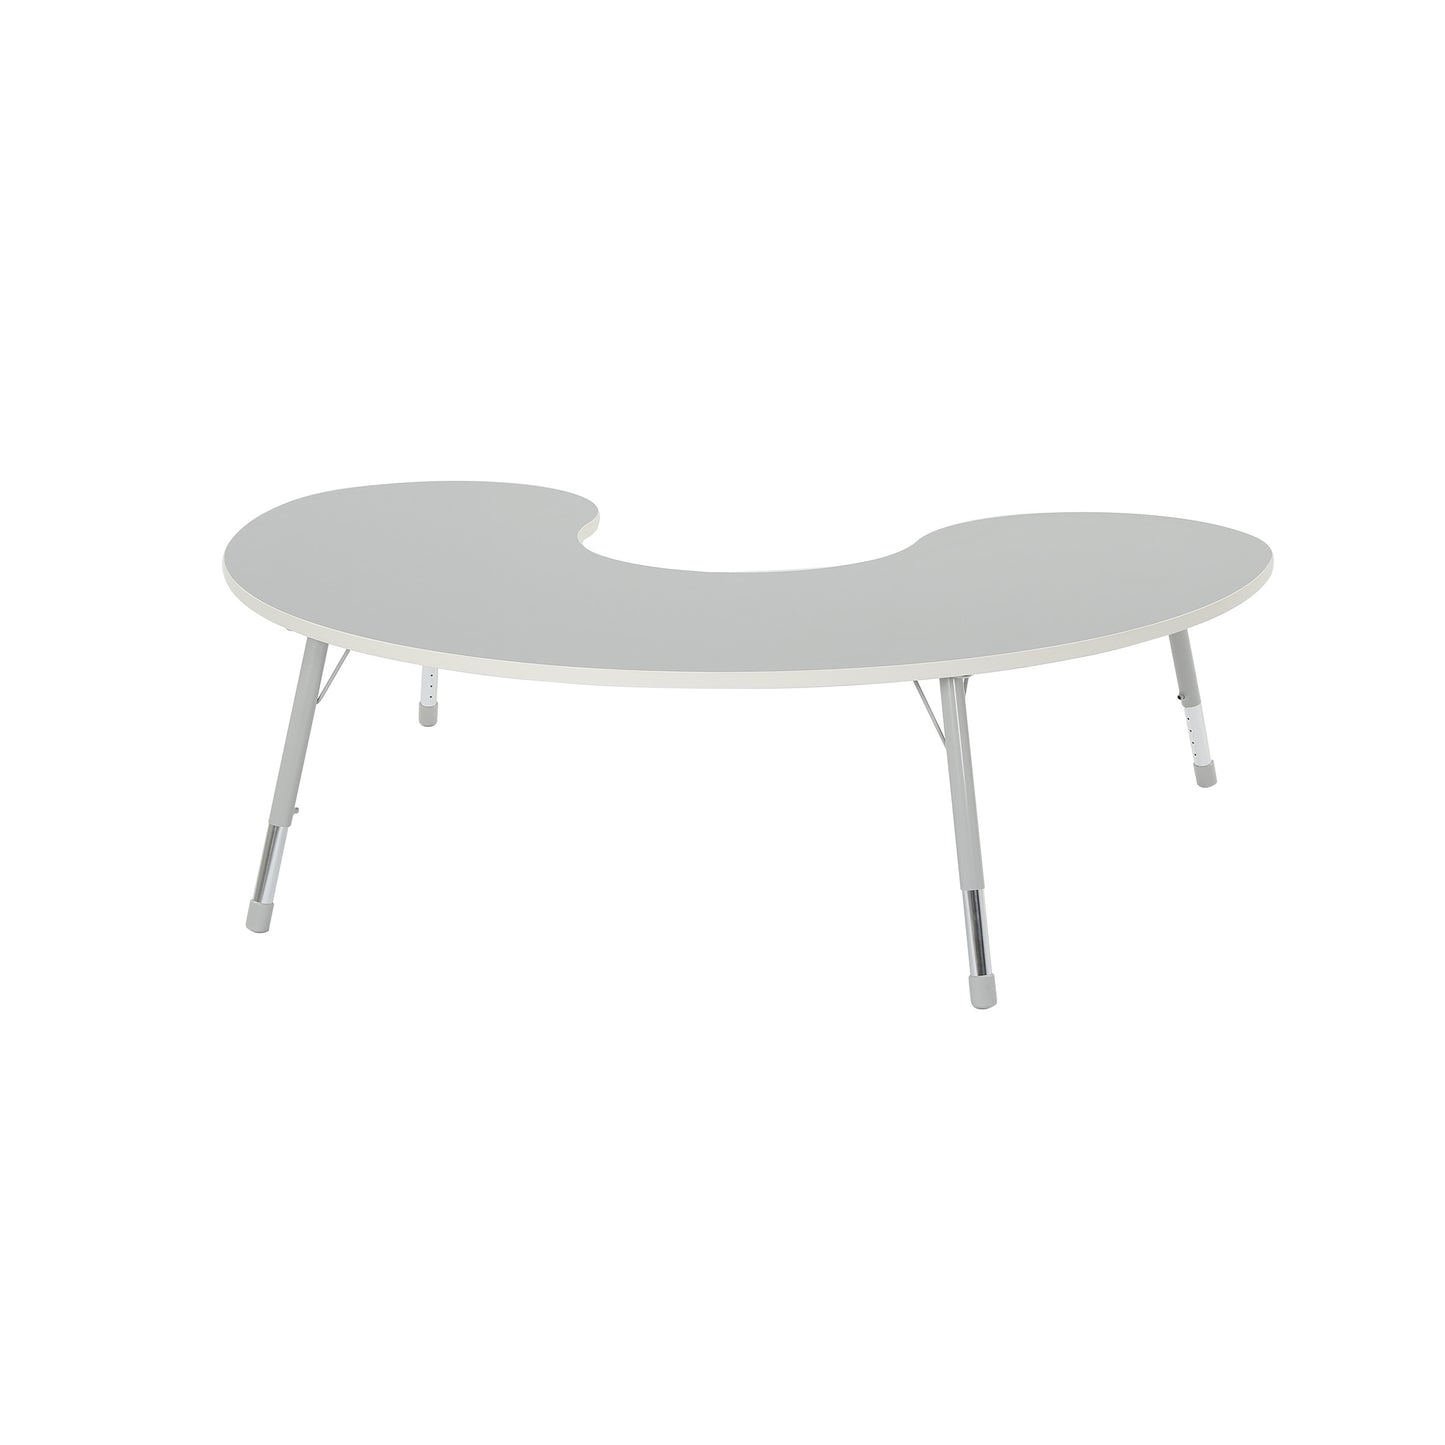 Thrifty Group Table 6 Seater – Grey